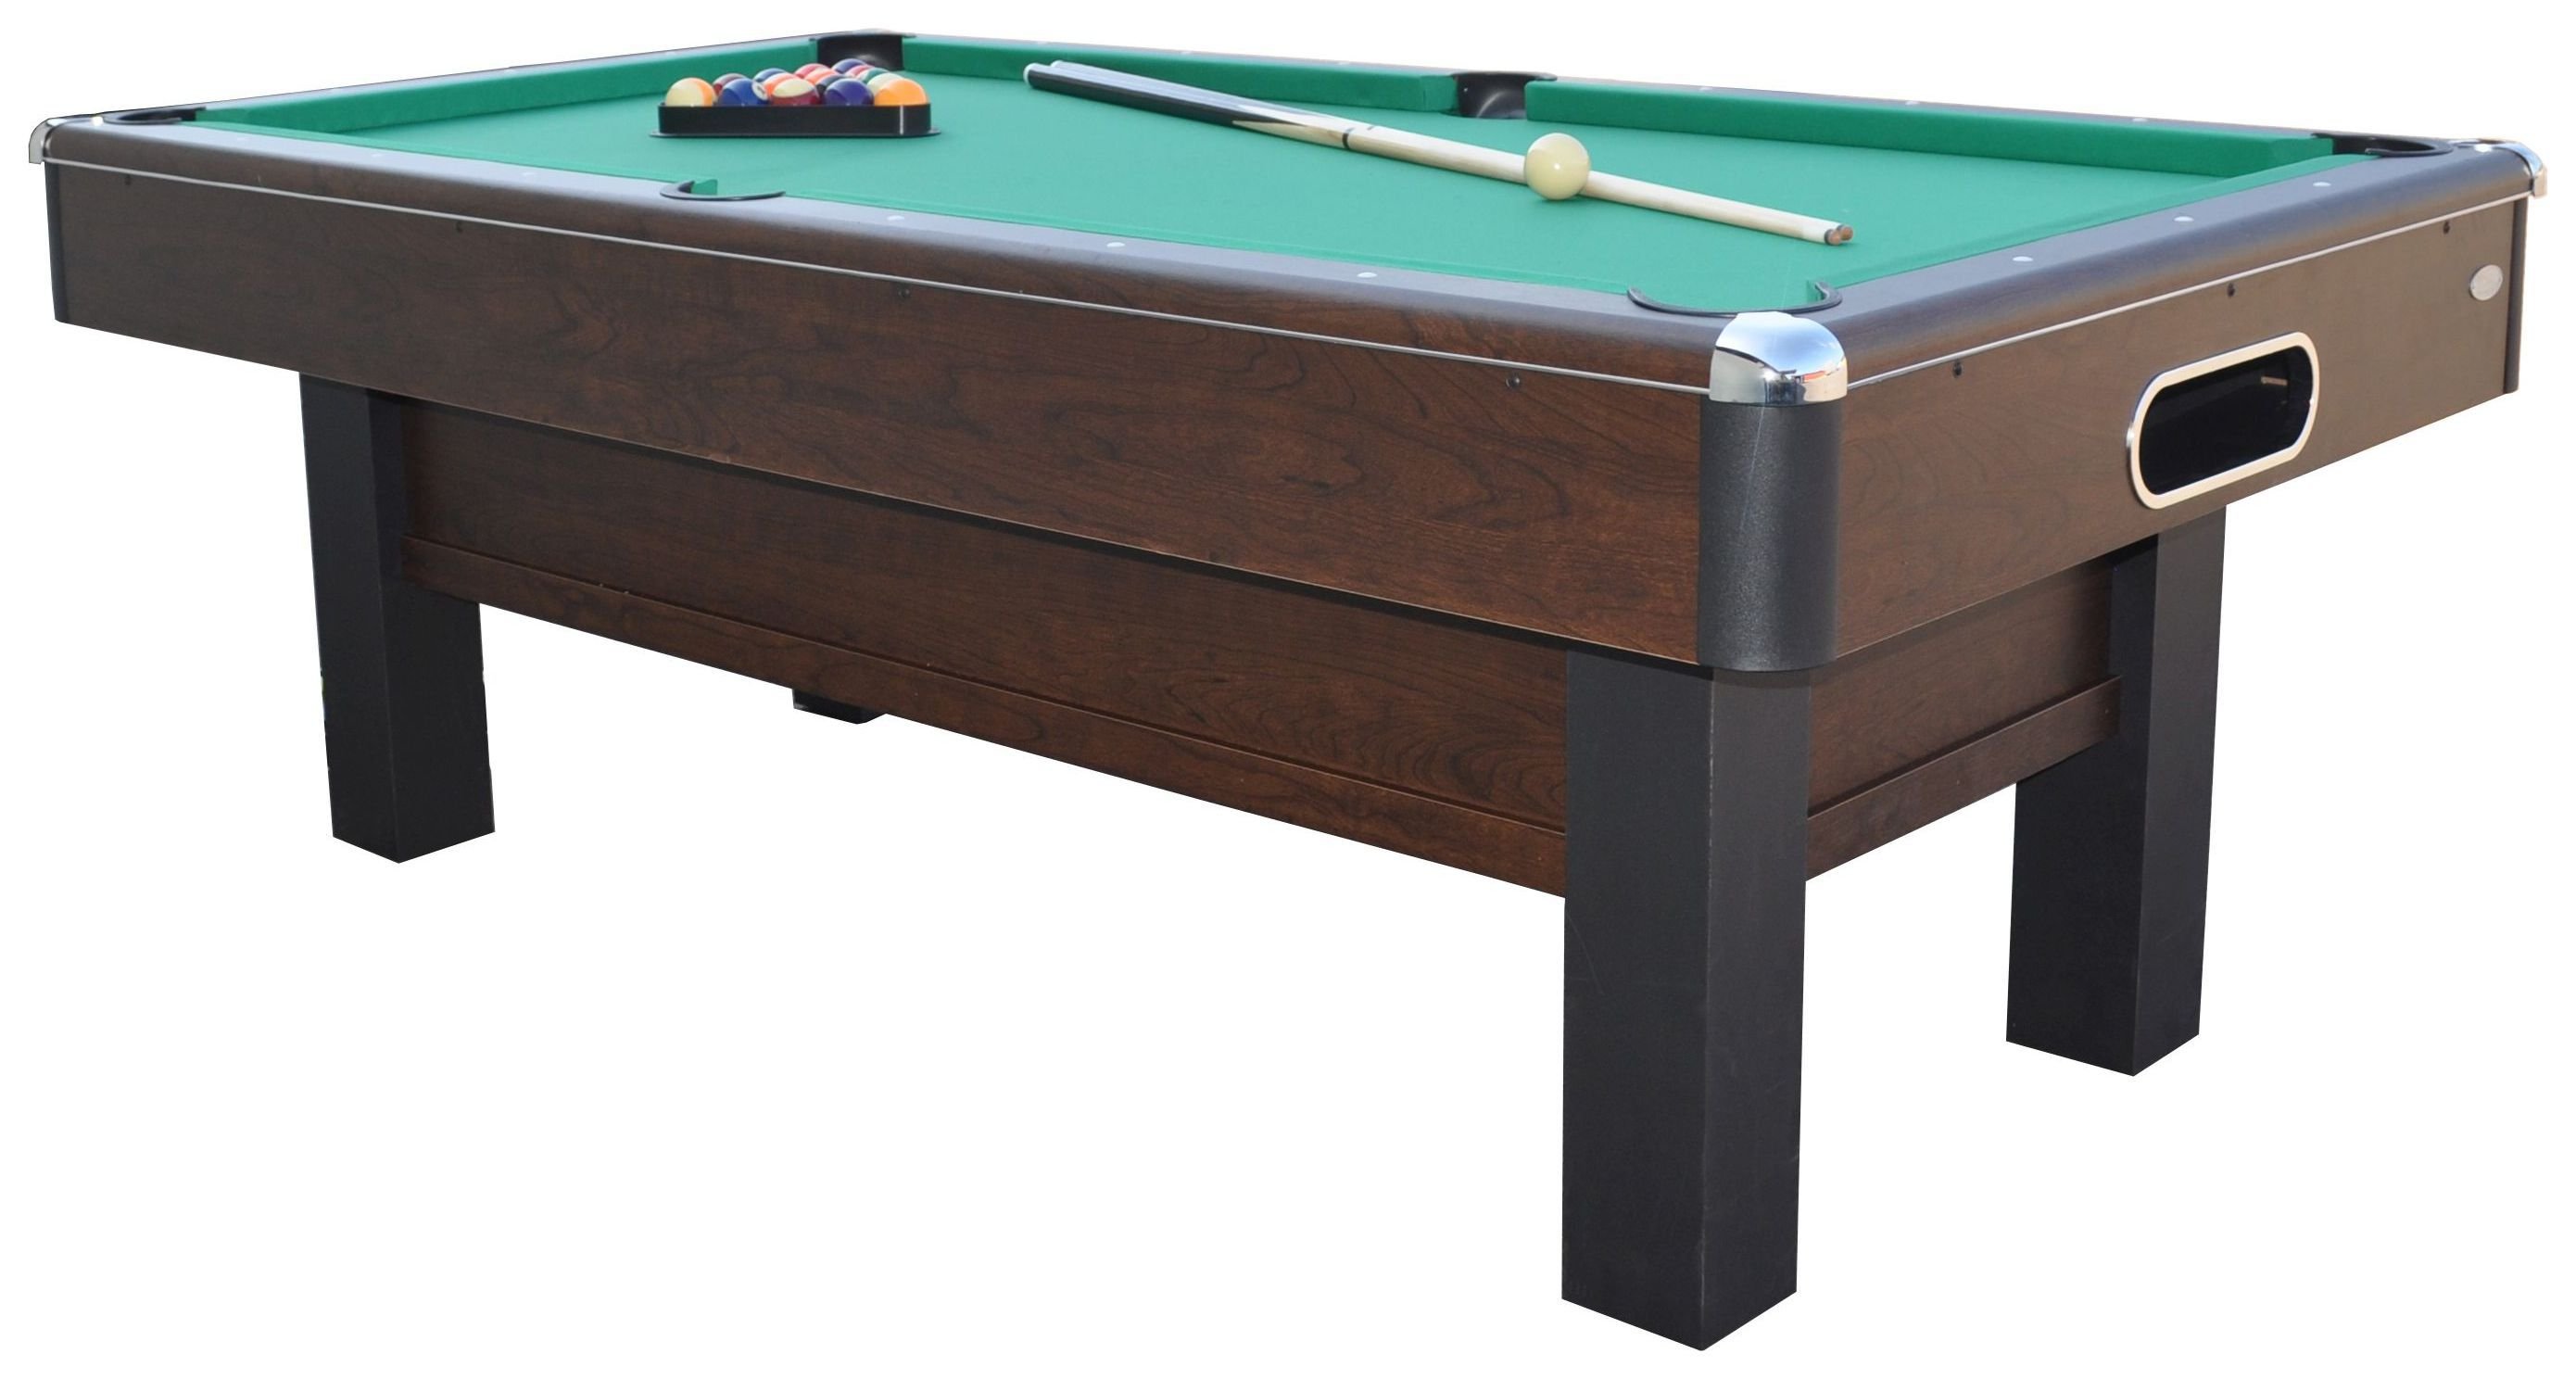 Gamesson Cambridge Pool Table. Review